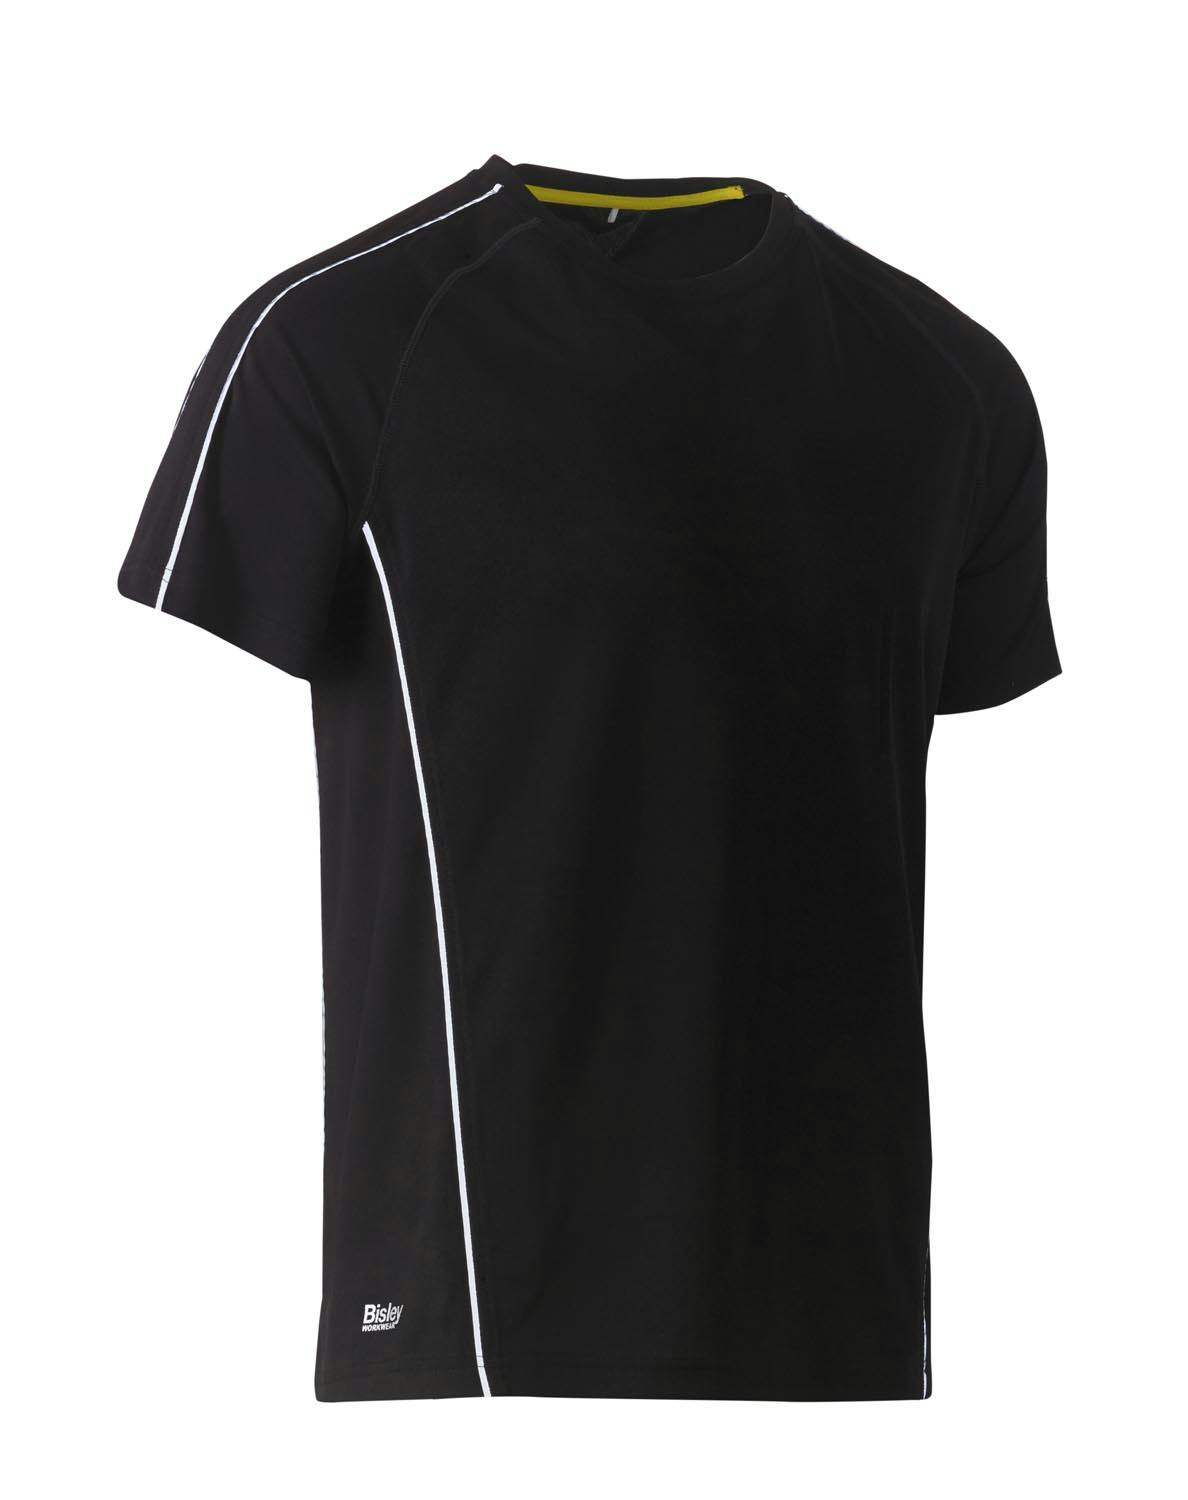 Bisley Cool Mesh Tee with Reflective Piping